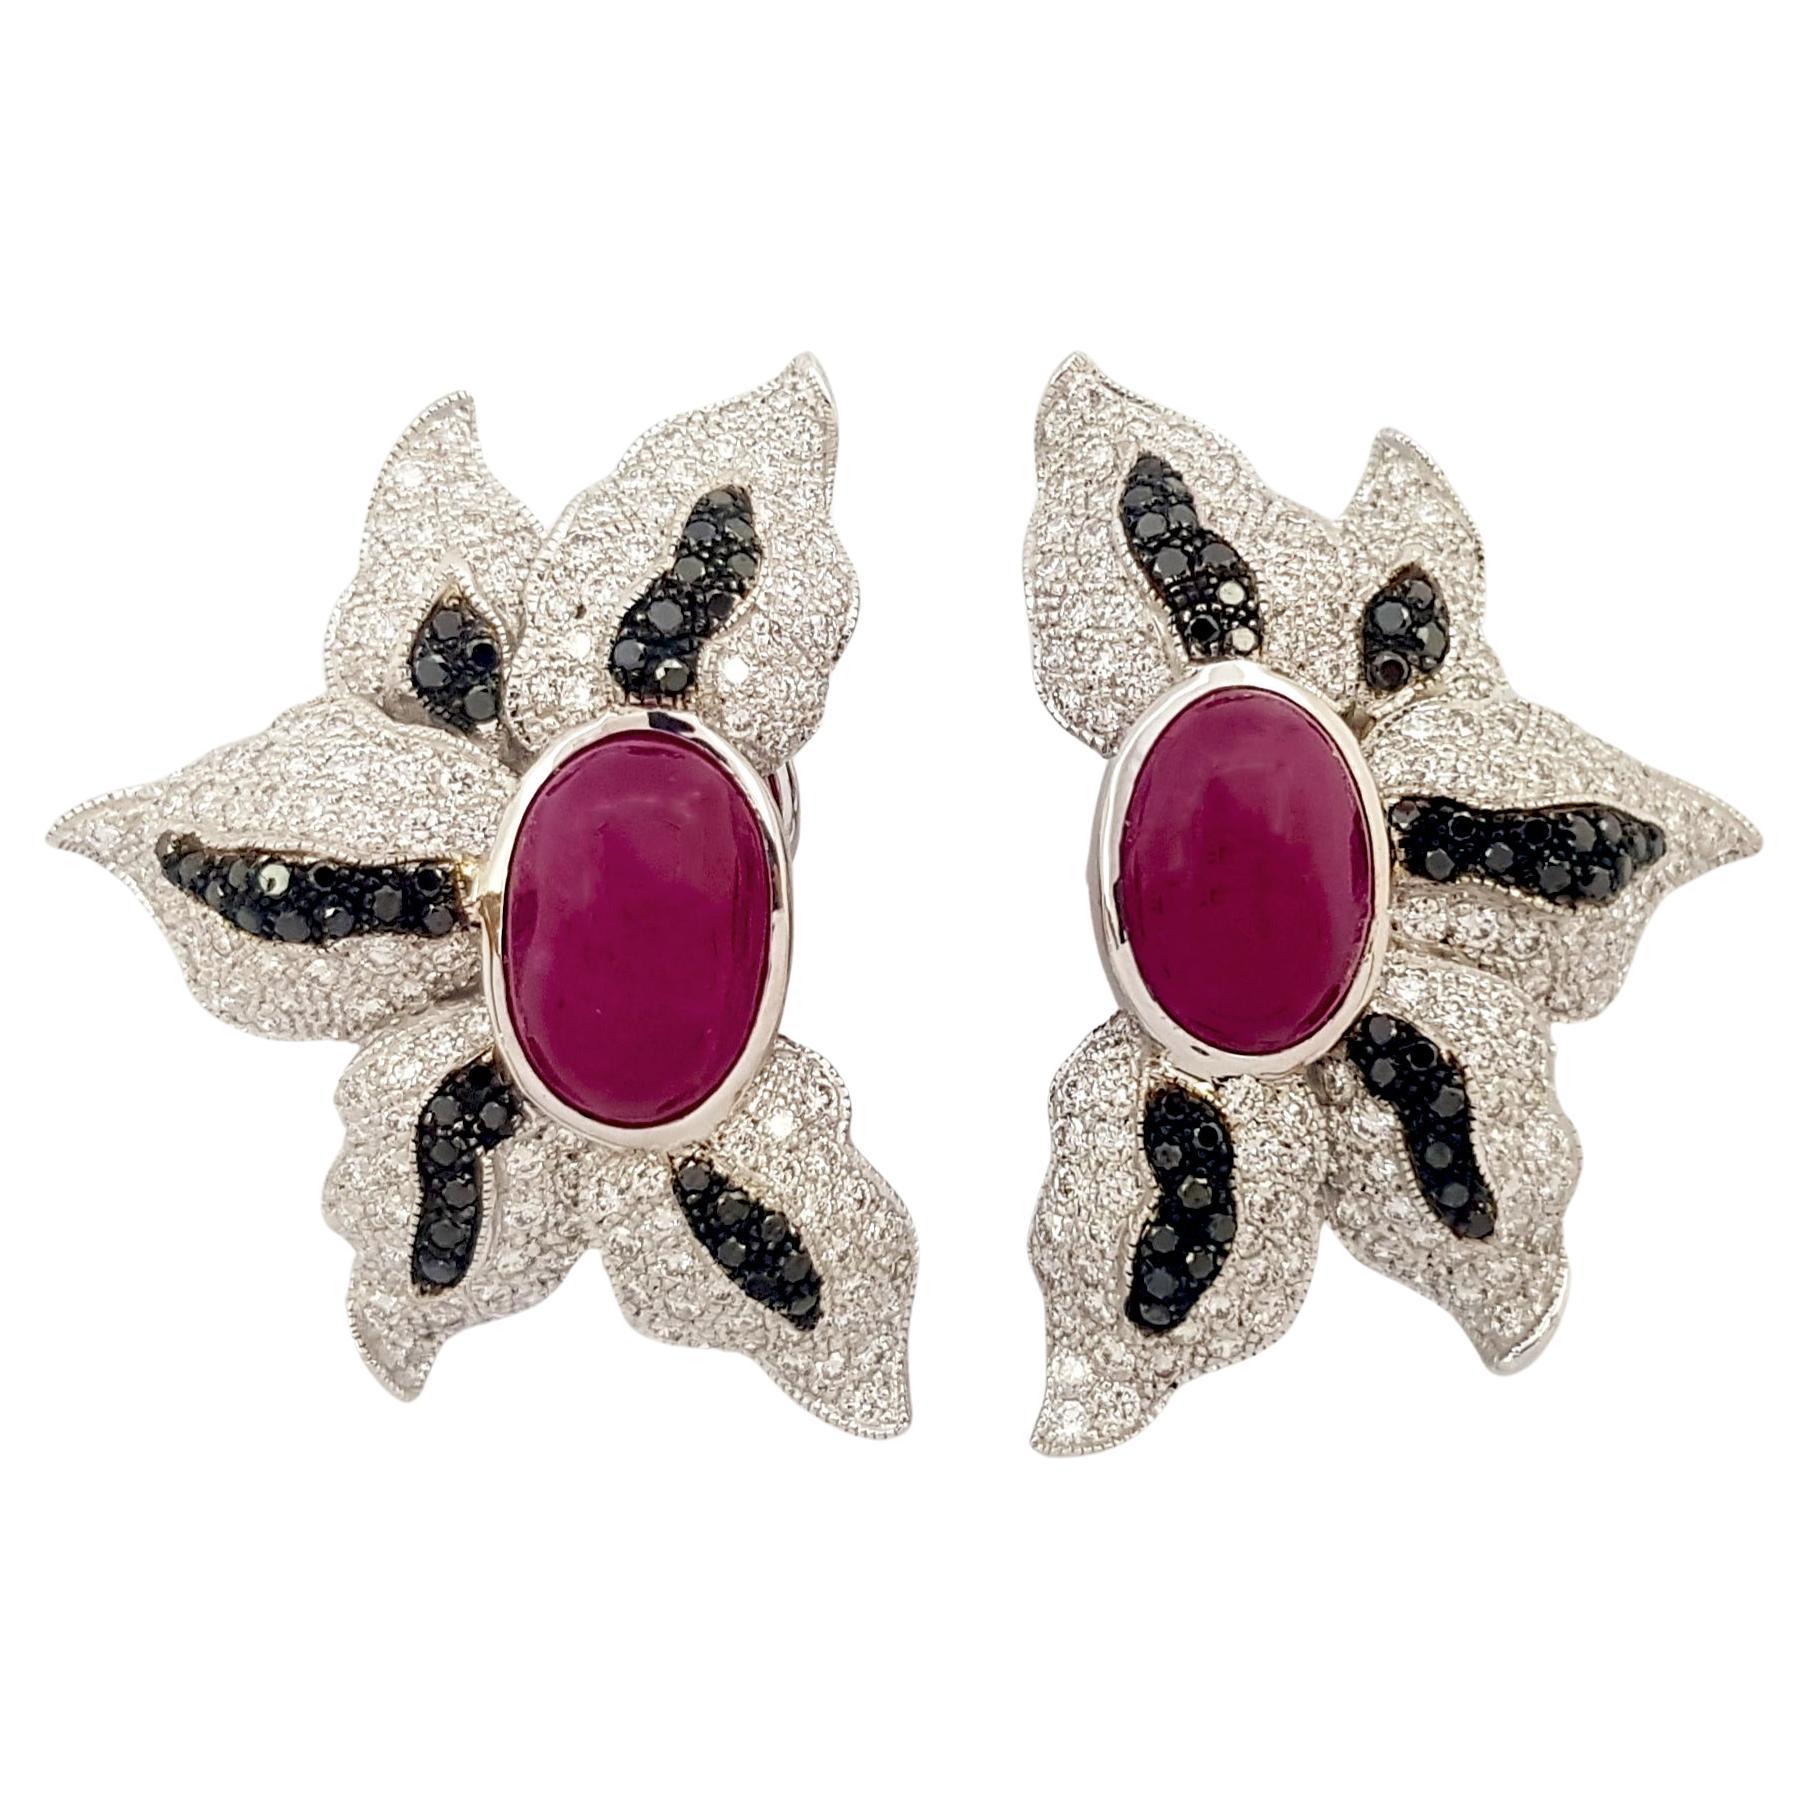 Cabochon Ruby, Diamond and Black Diamond Earrings set in 18K White Gold Settings For Sale